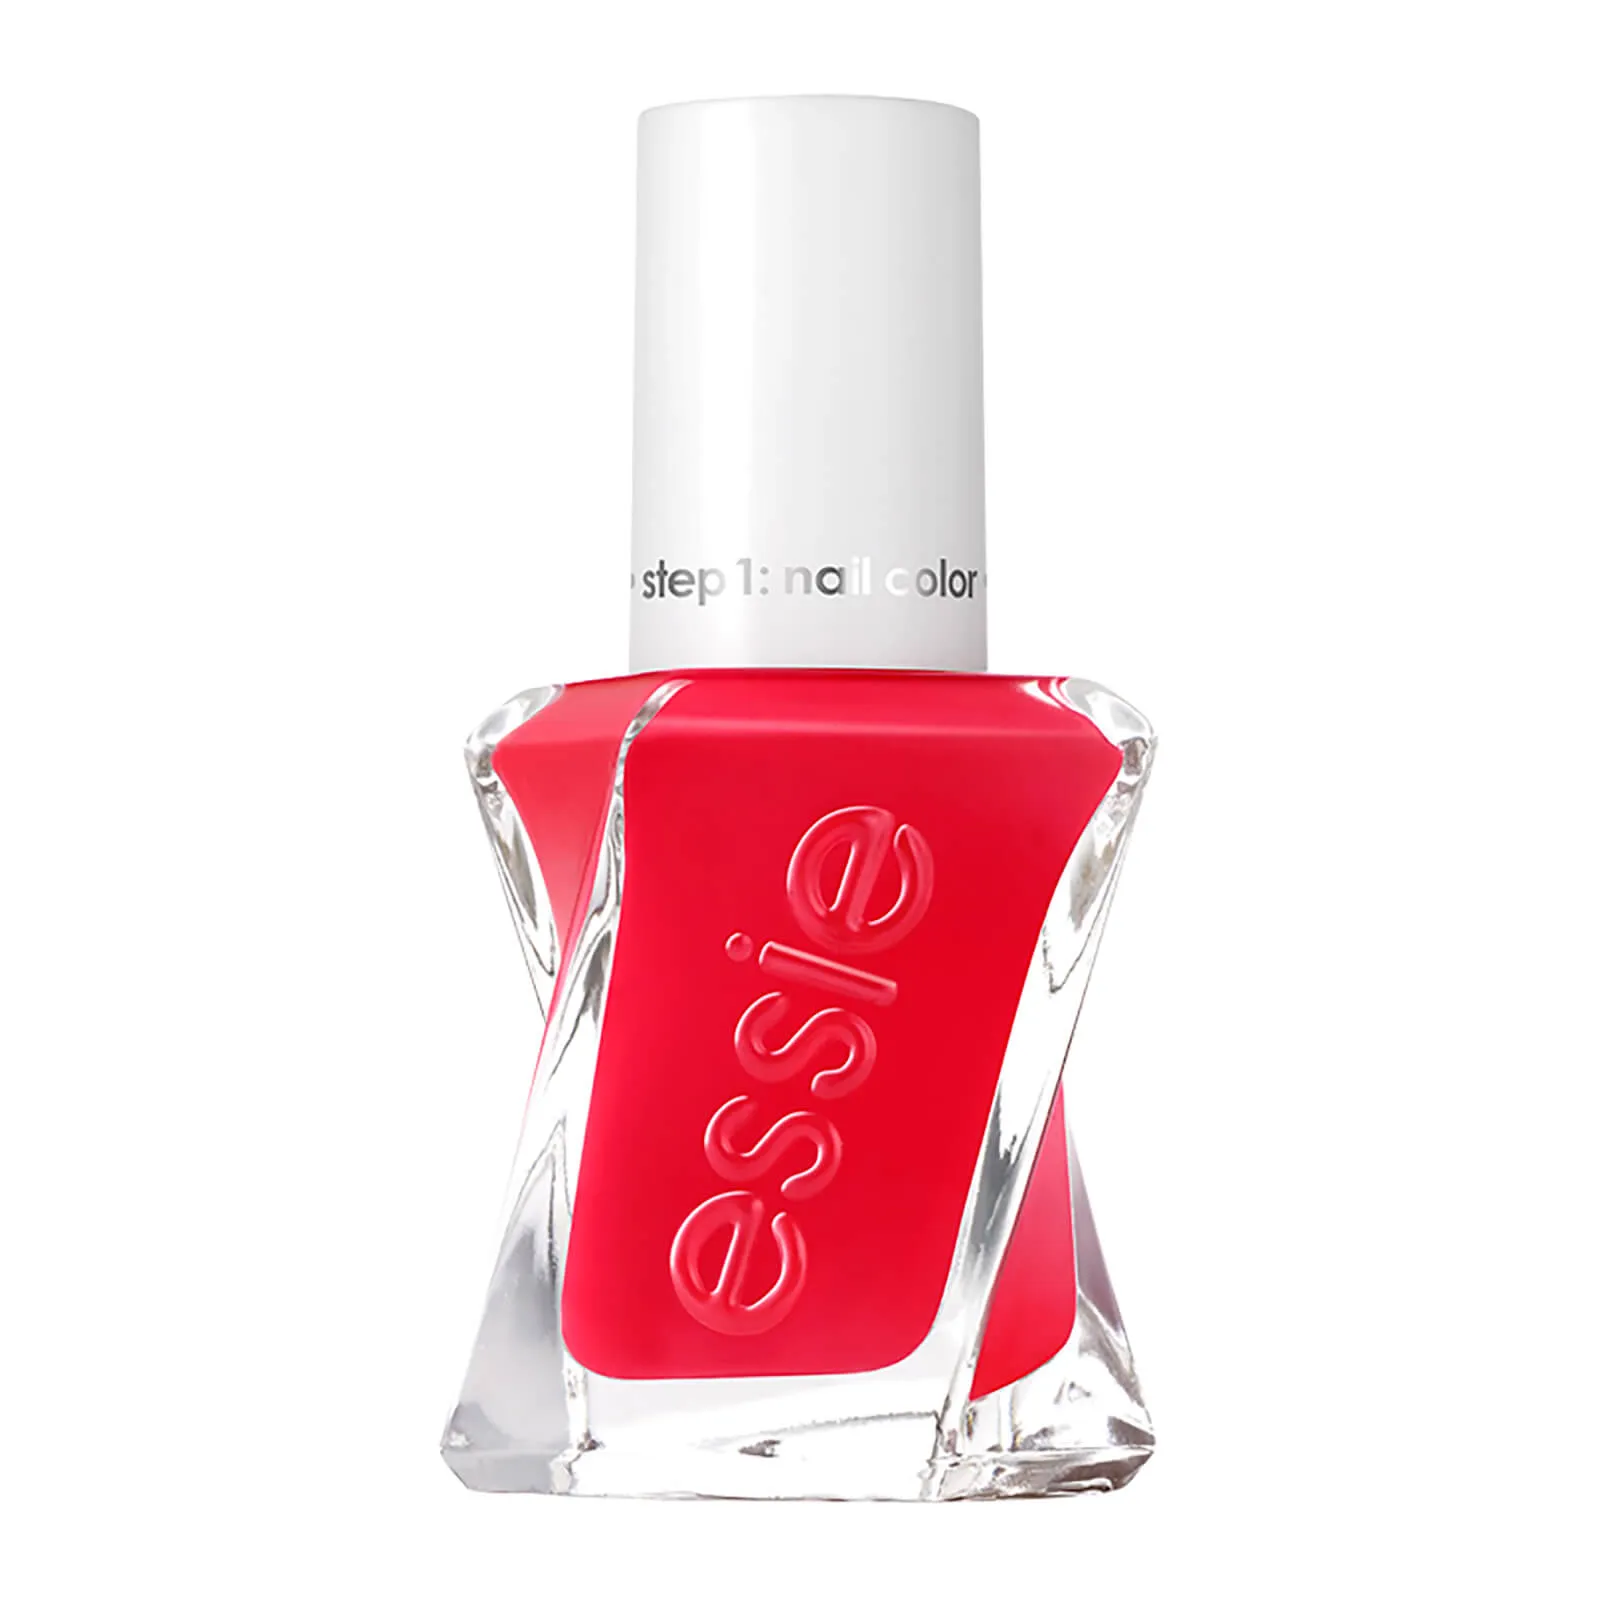  Gel Couture Long Lasting High Shine Gel Nail Polish - 470 Sizzling Hot Bright Red 13.5ml